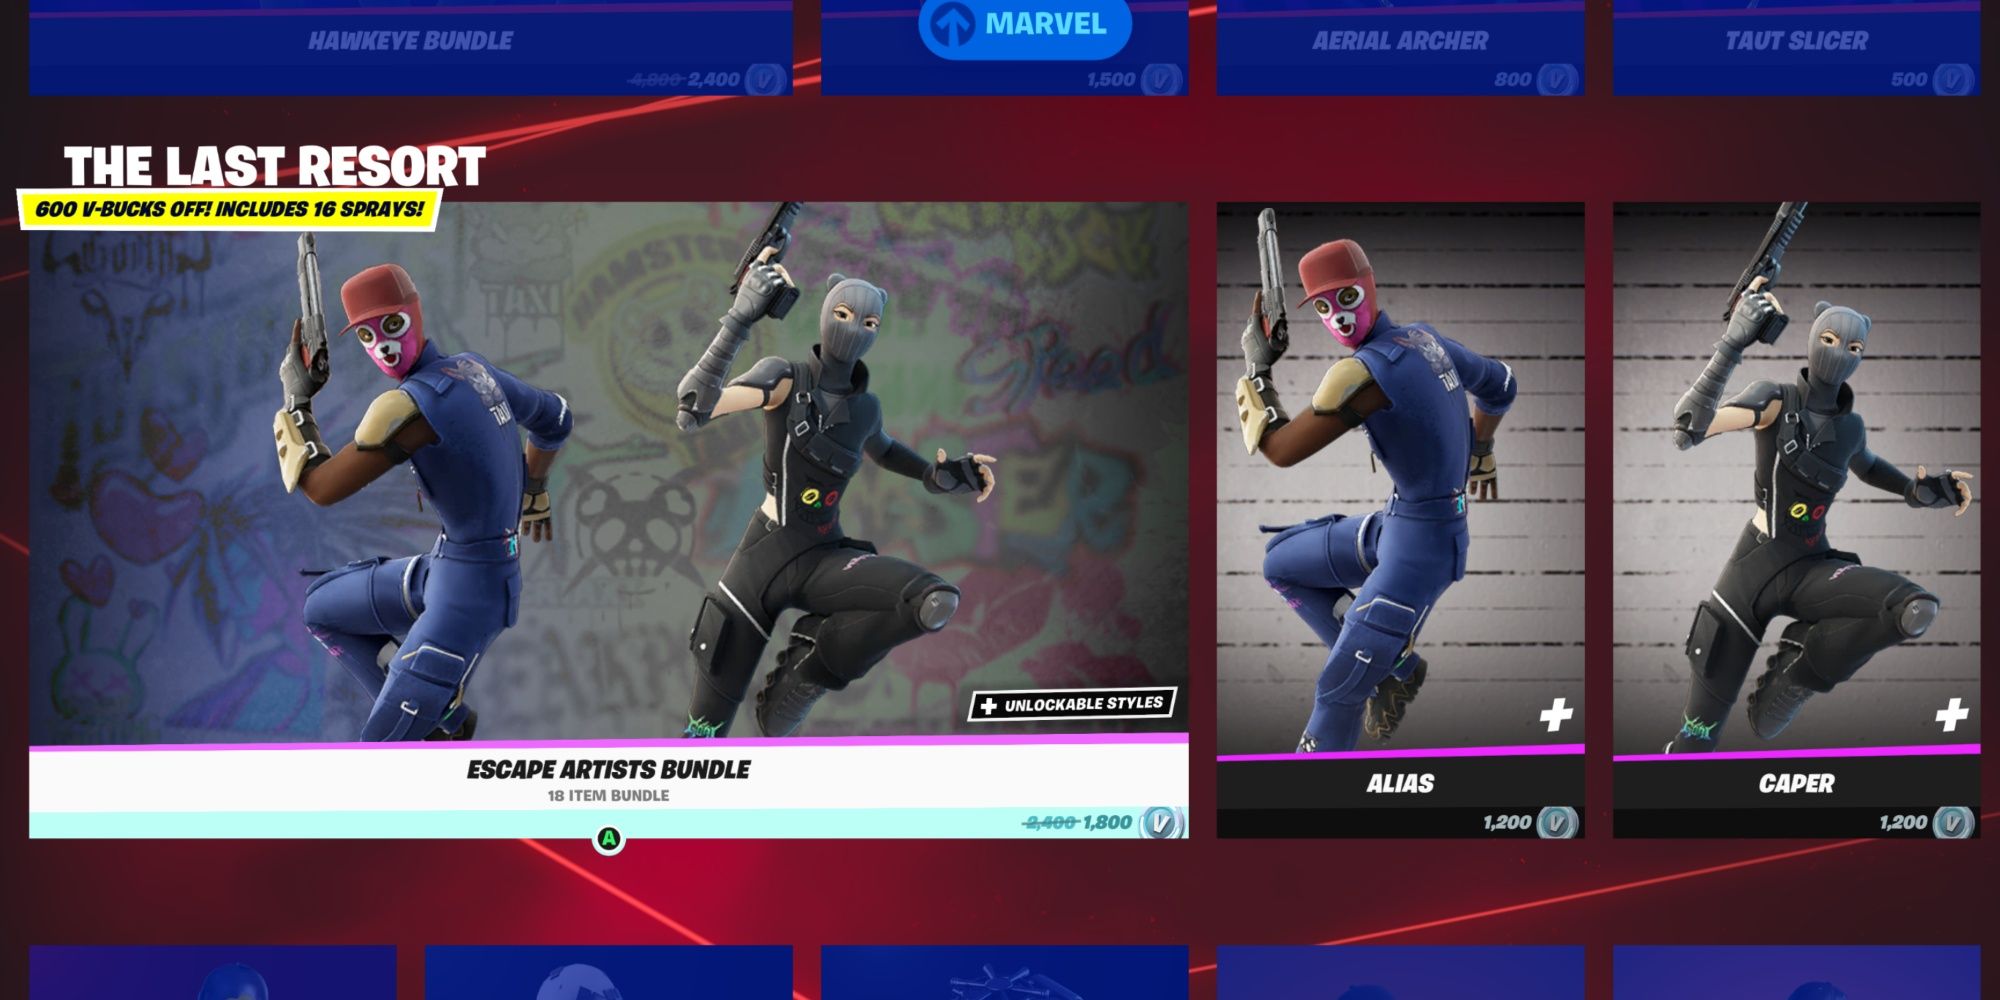 item shop spray skins feature images